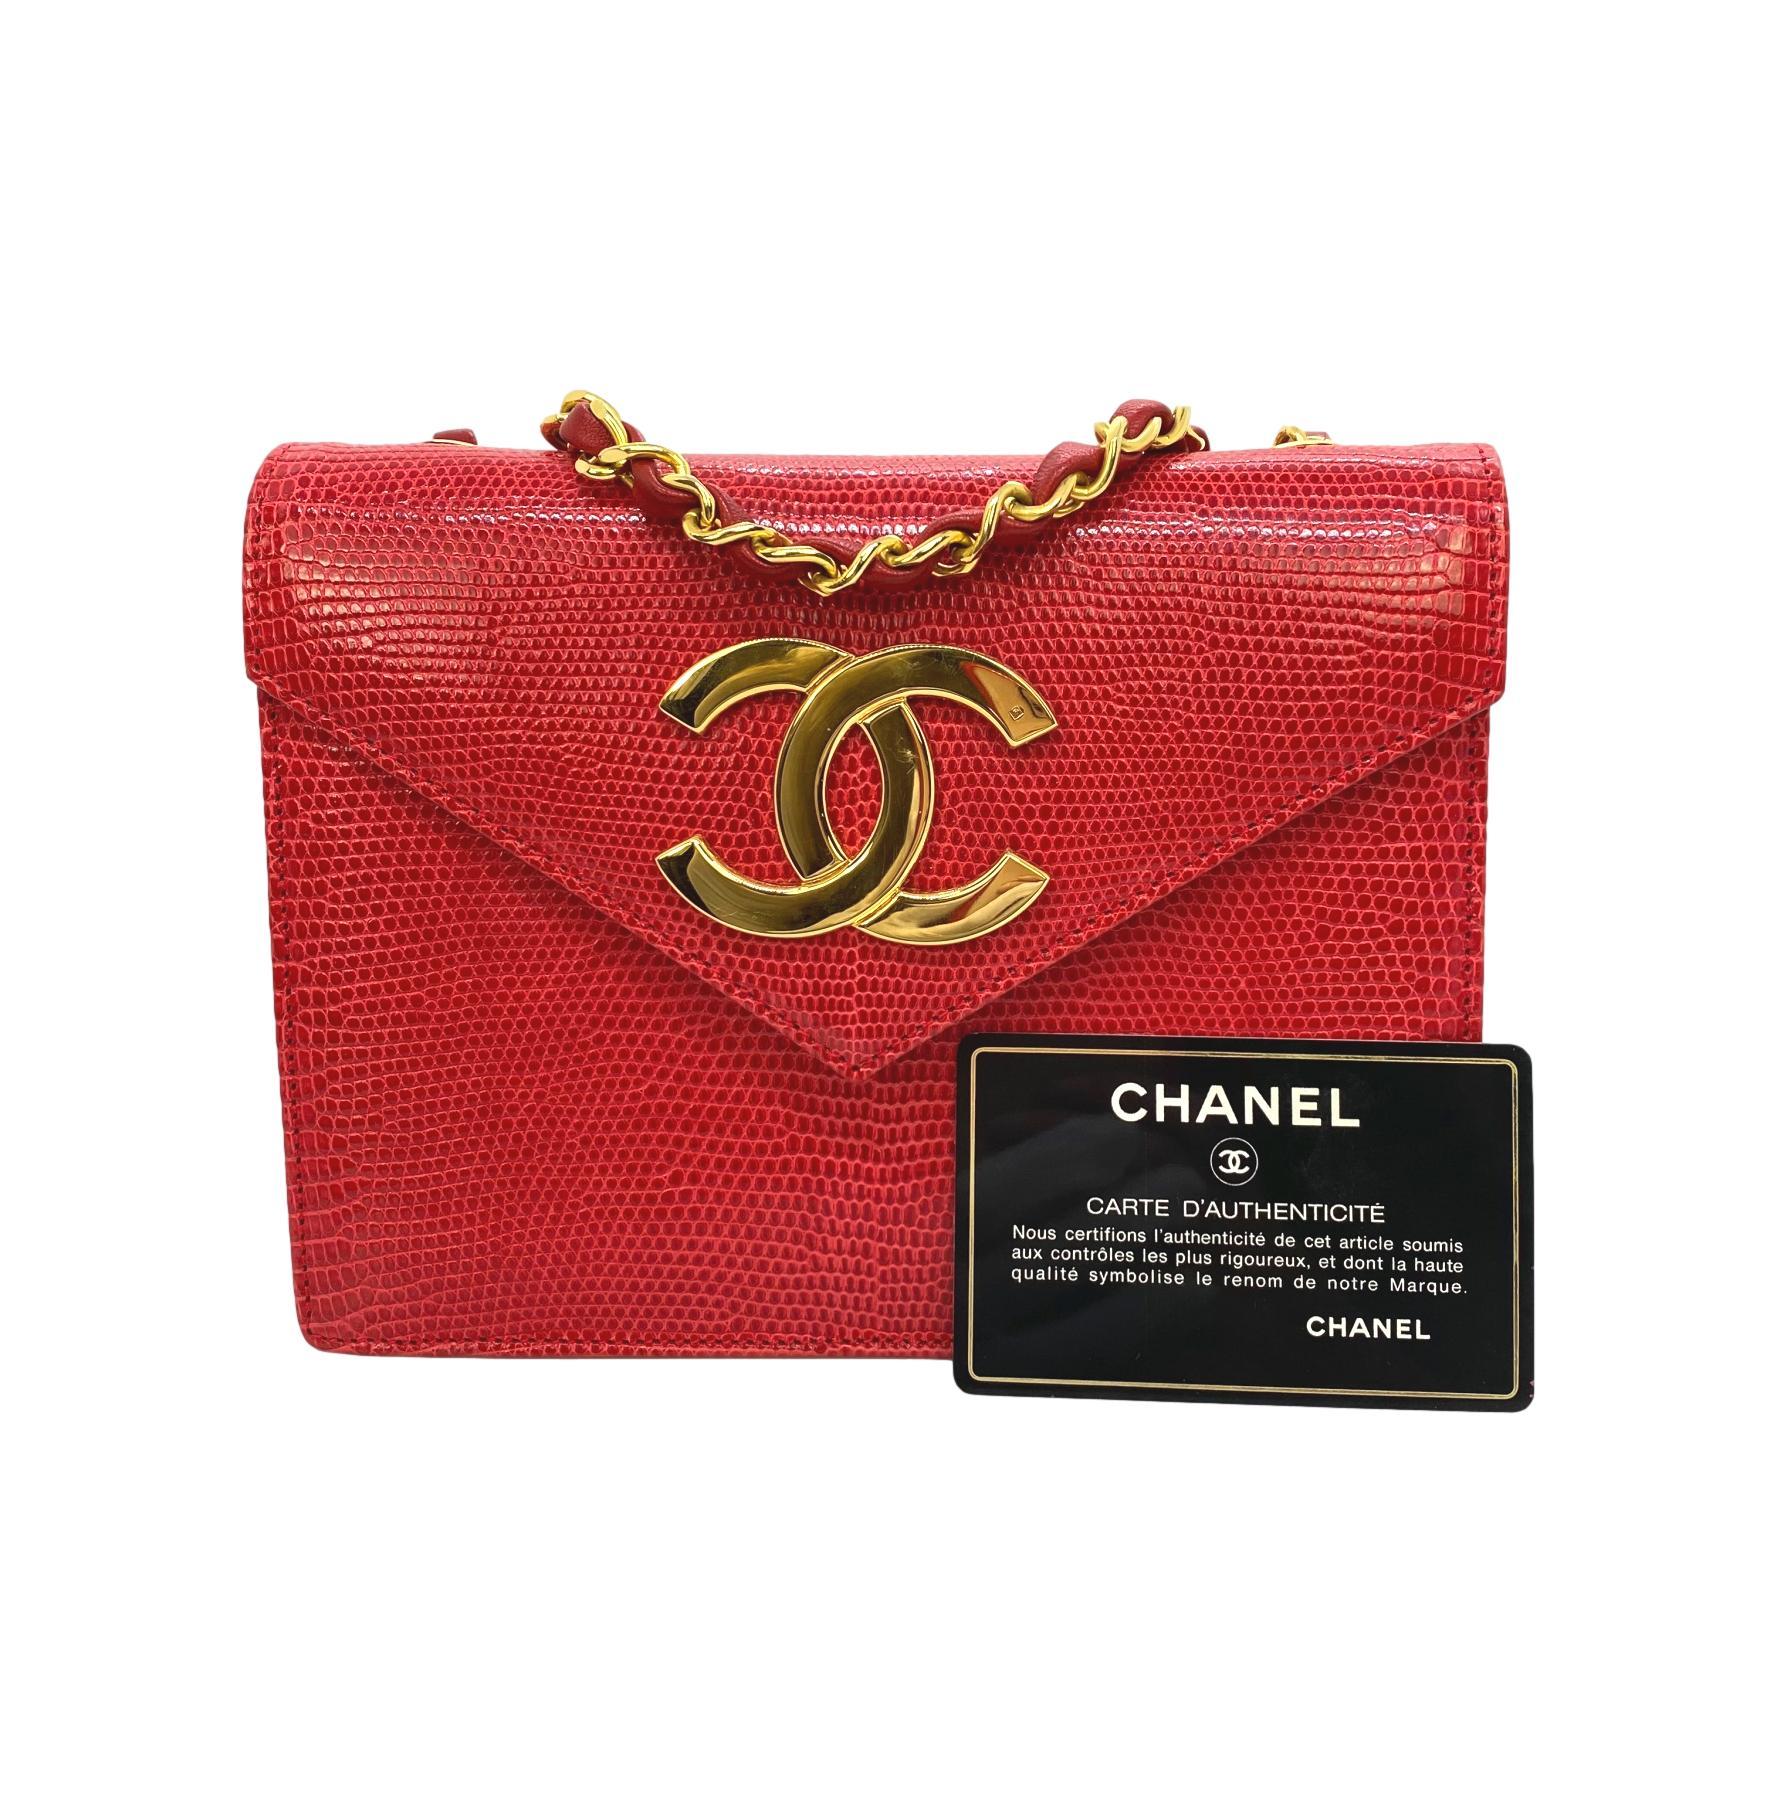 Chanel Vintage Red Lizard Envelope Cross Body Flap Bag with Gold Hardware. Exceptional and rare, this highly sought after piece of Chanel history was produced between 1989 - 1990 baring a serial code of 